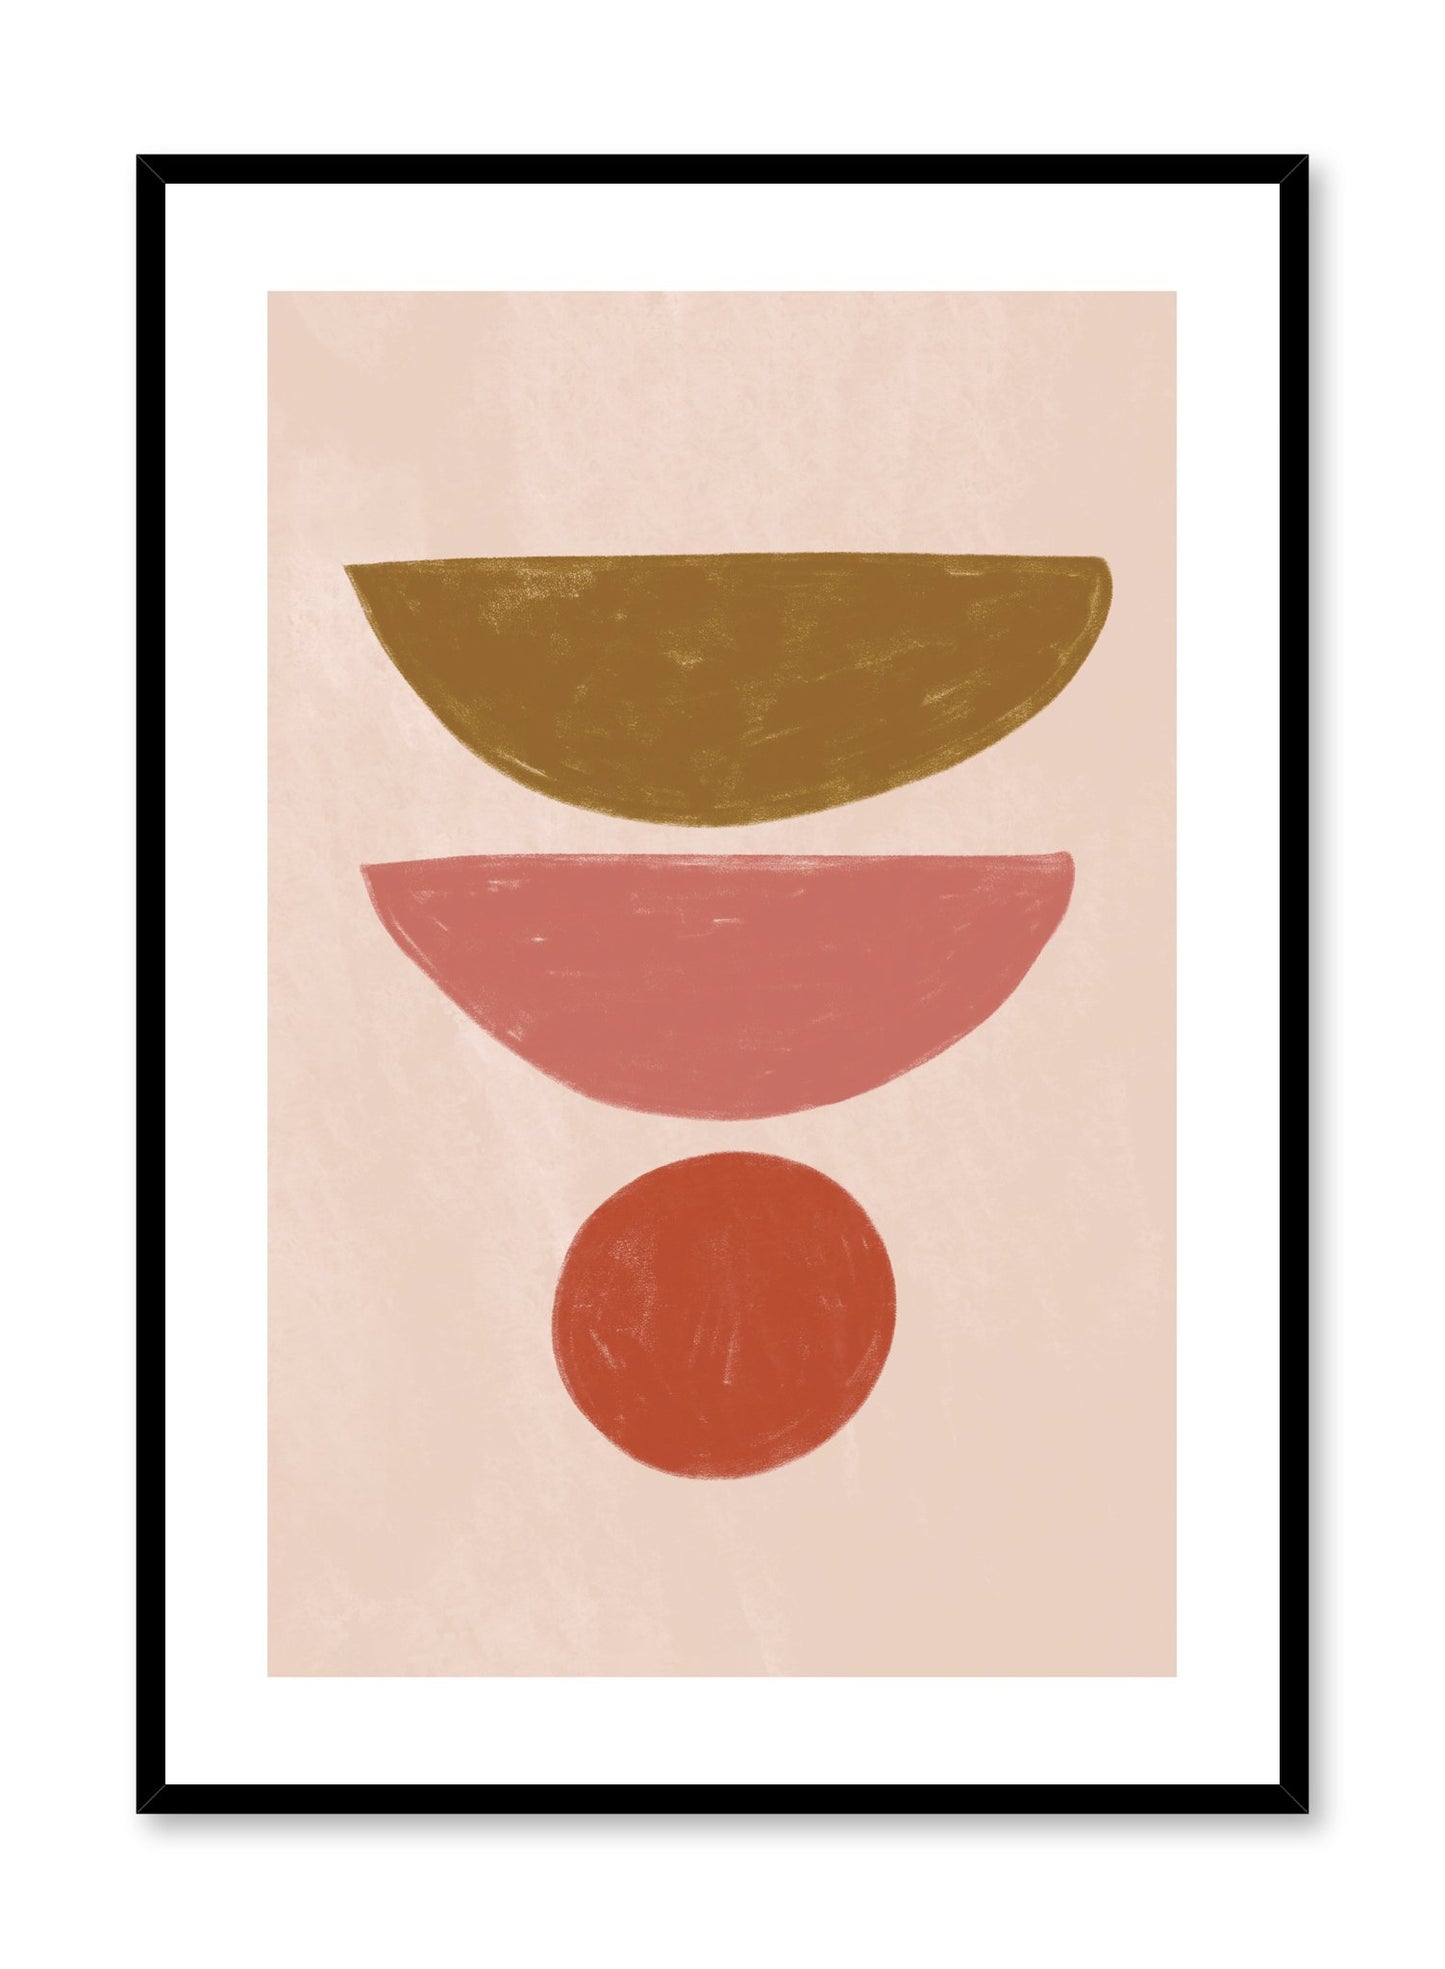 Modern abstract illustration poster by Opposite Wall with balancing shapes by Toffie Affichiste